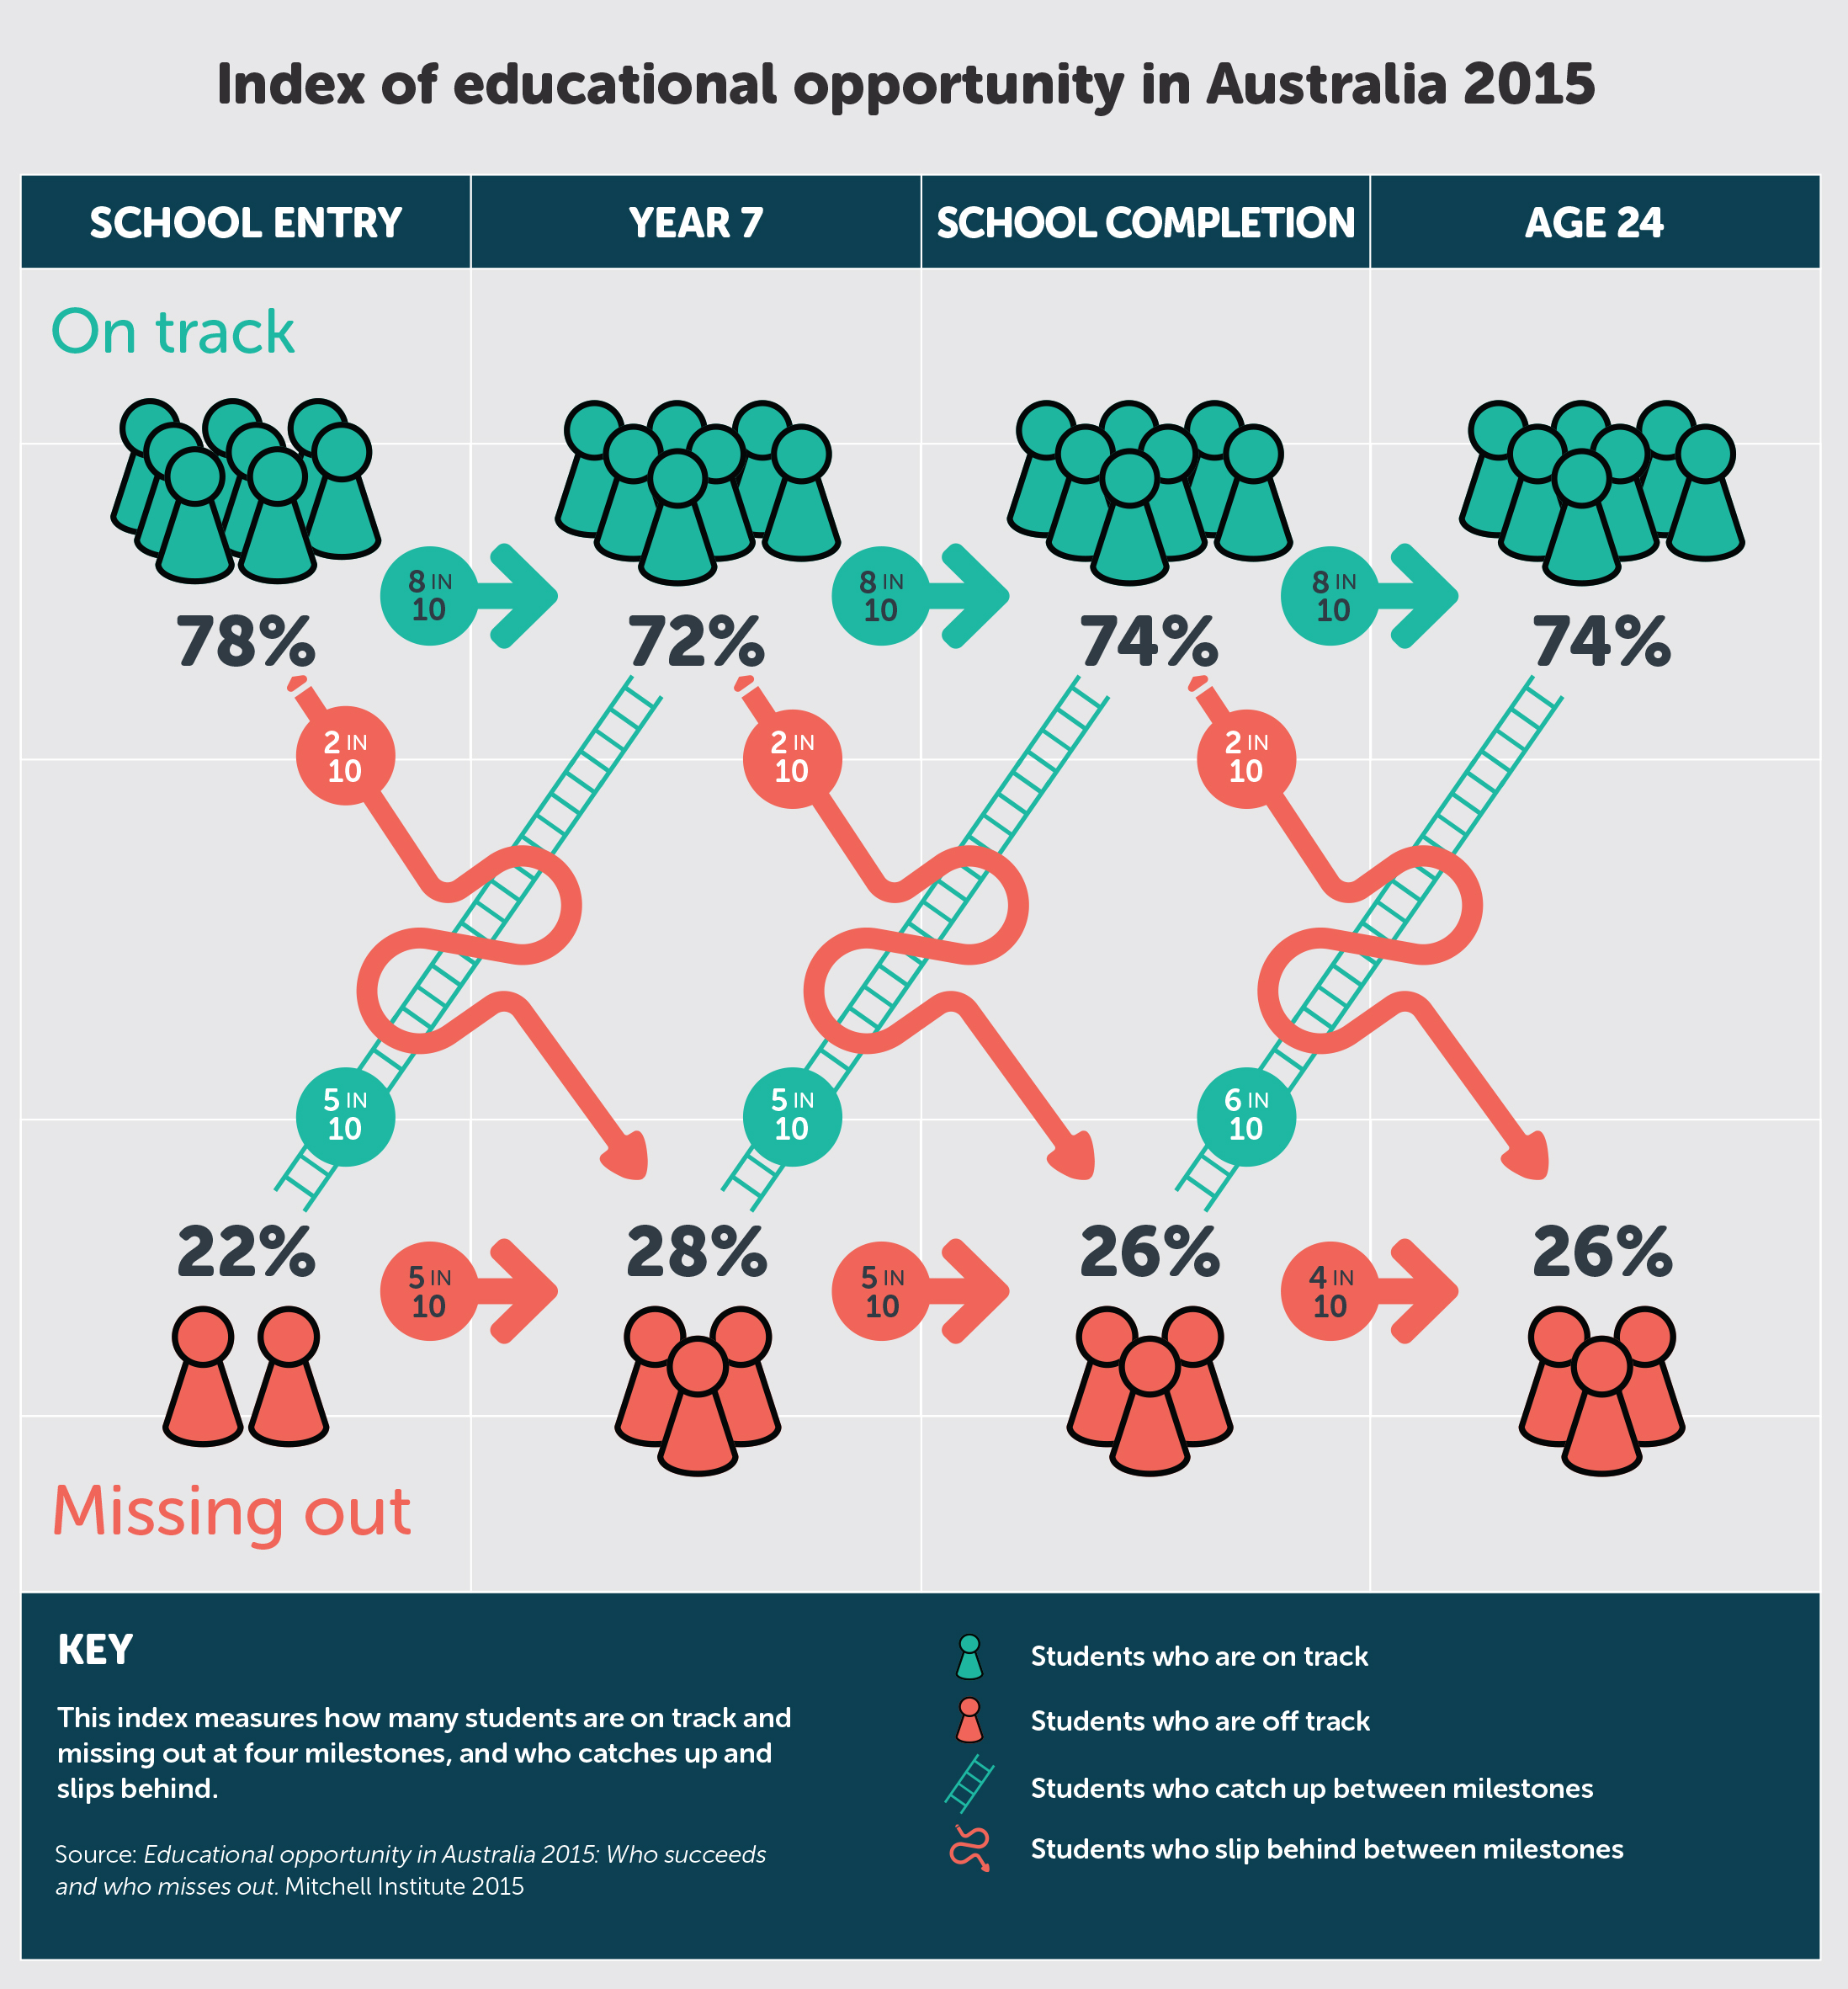 Index of educational opportunity in Australia 2015 shows how many students are on track and missing out at four milestones (school entry, Year 7, school completion, age 24), indicating over 70% on track, with 2 in 10 slipping behind; 4-5 in 10 catching up